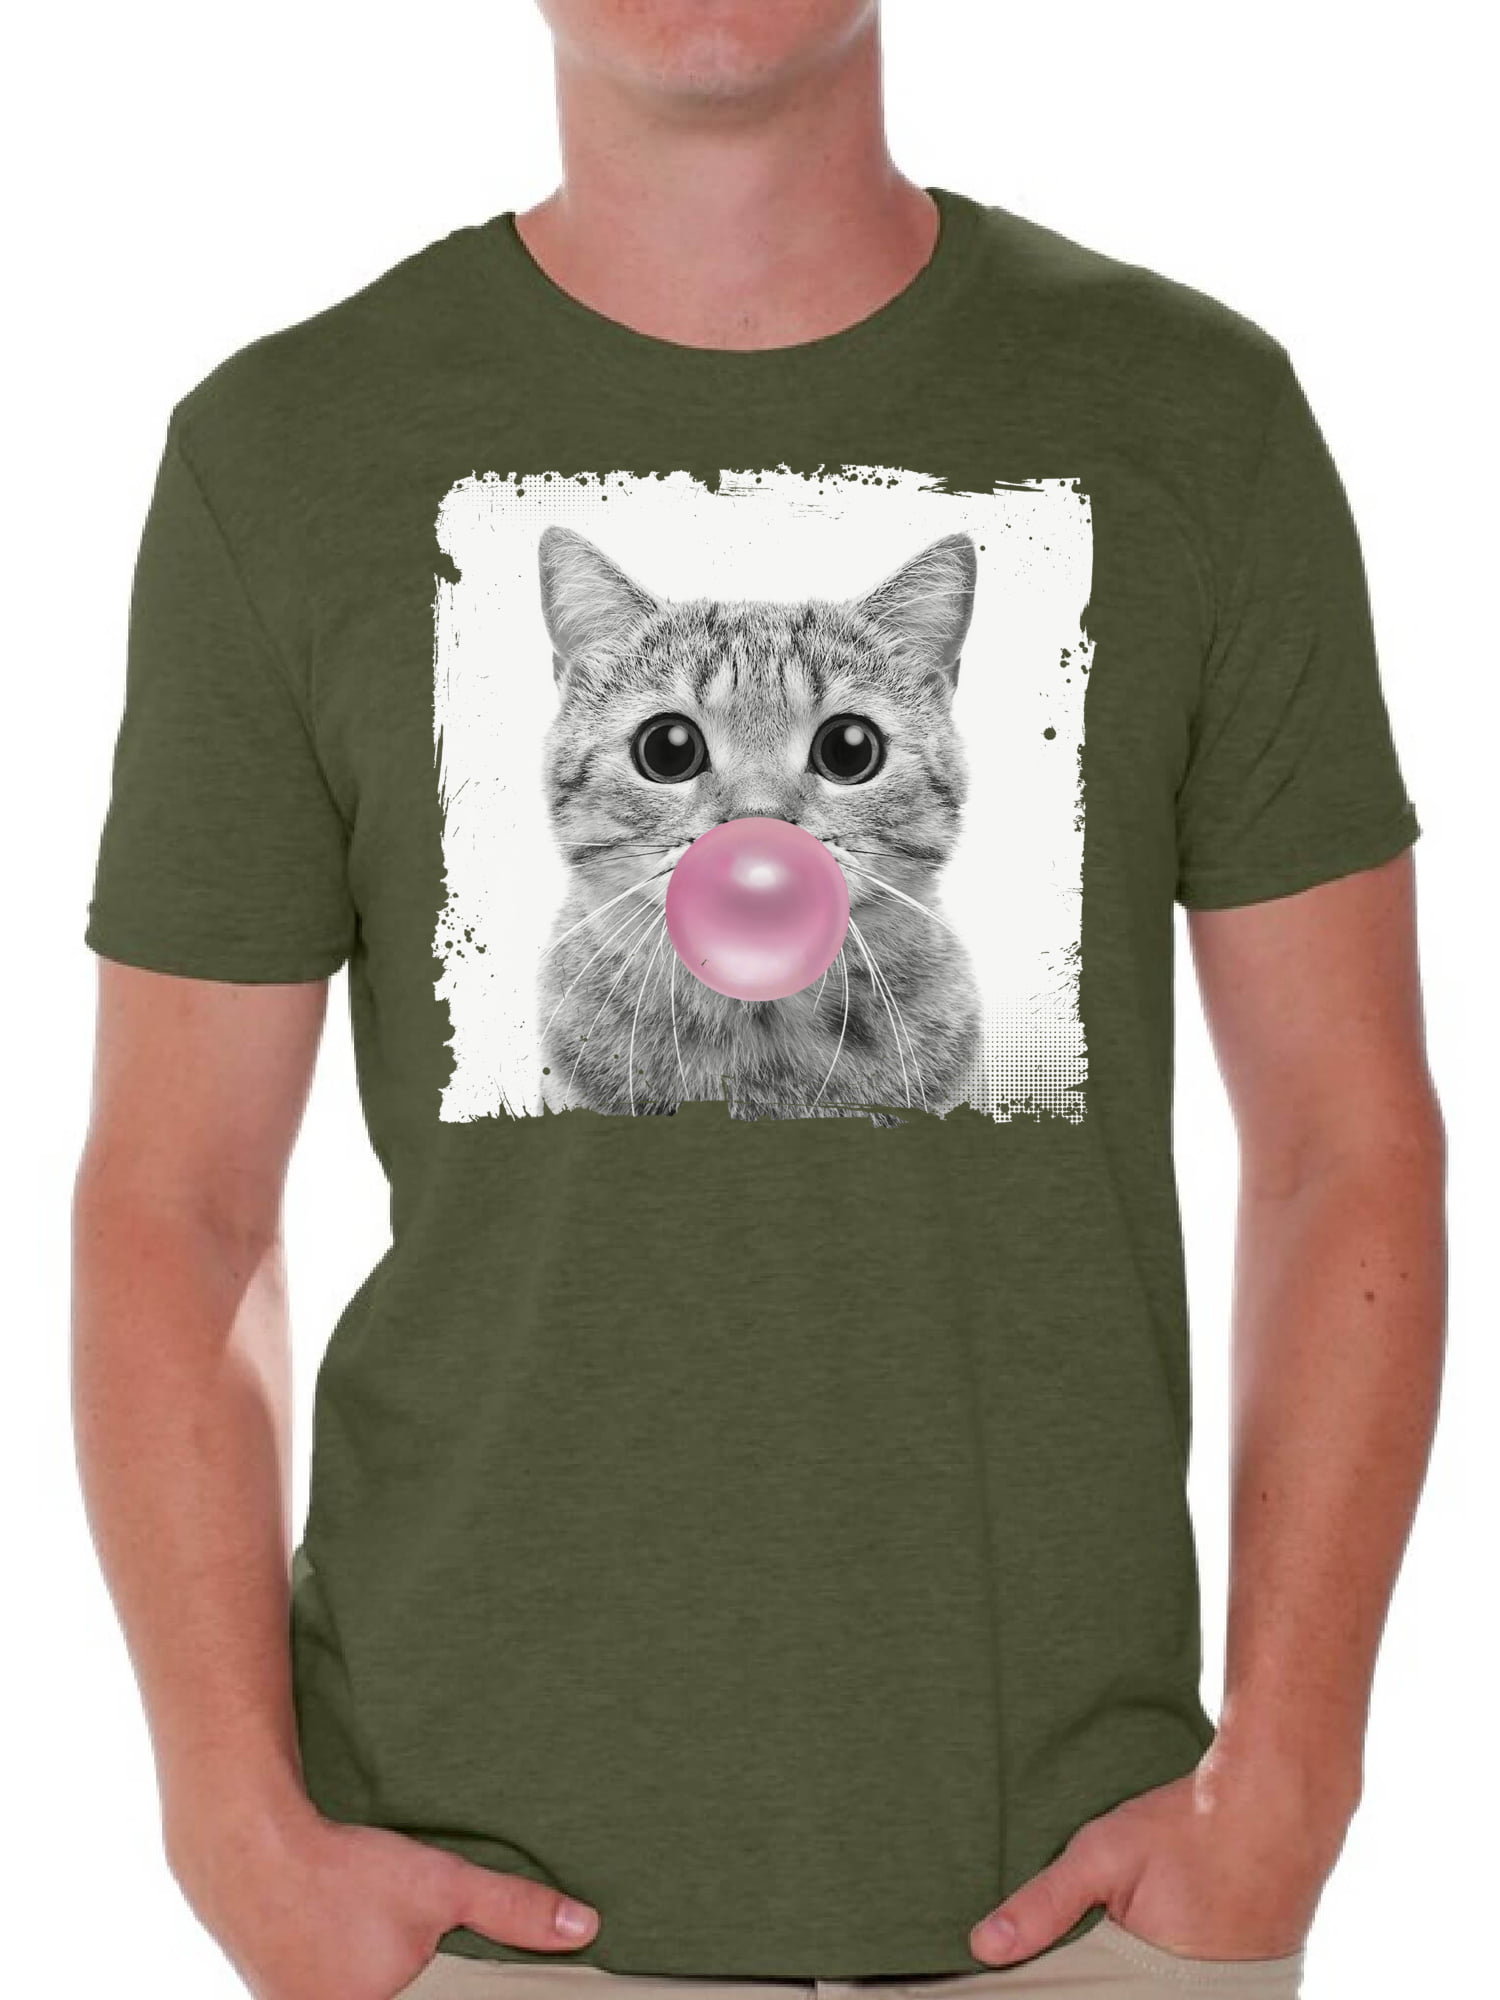 Awkward Styles Funny Cat Shirt for Him Funny Men T Shirt Little Cat Tshirt Cat with Pink Gum T Shirt Cat Clothing Animal T-Shirt for Men Funny Animal Gifts Cat T